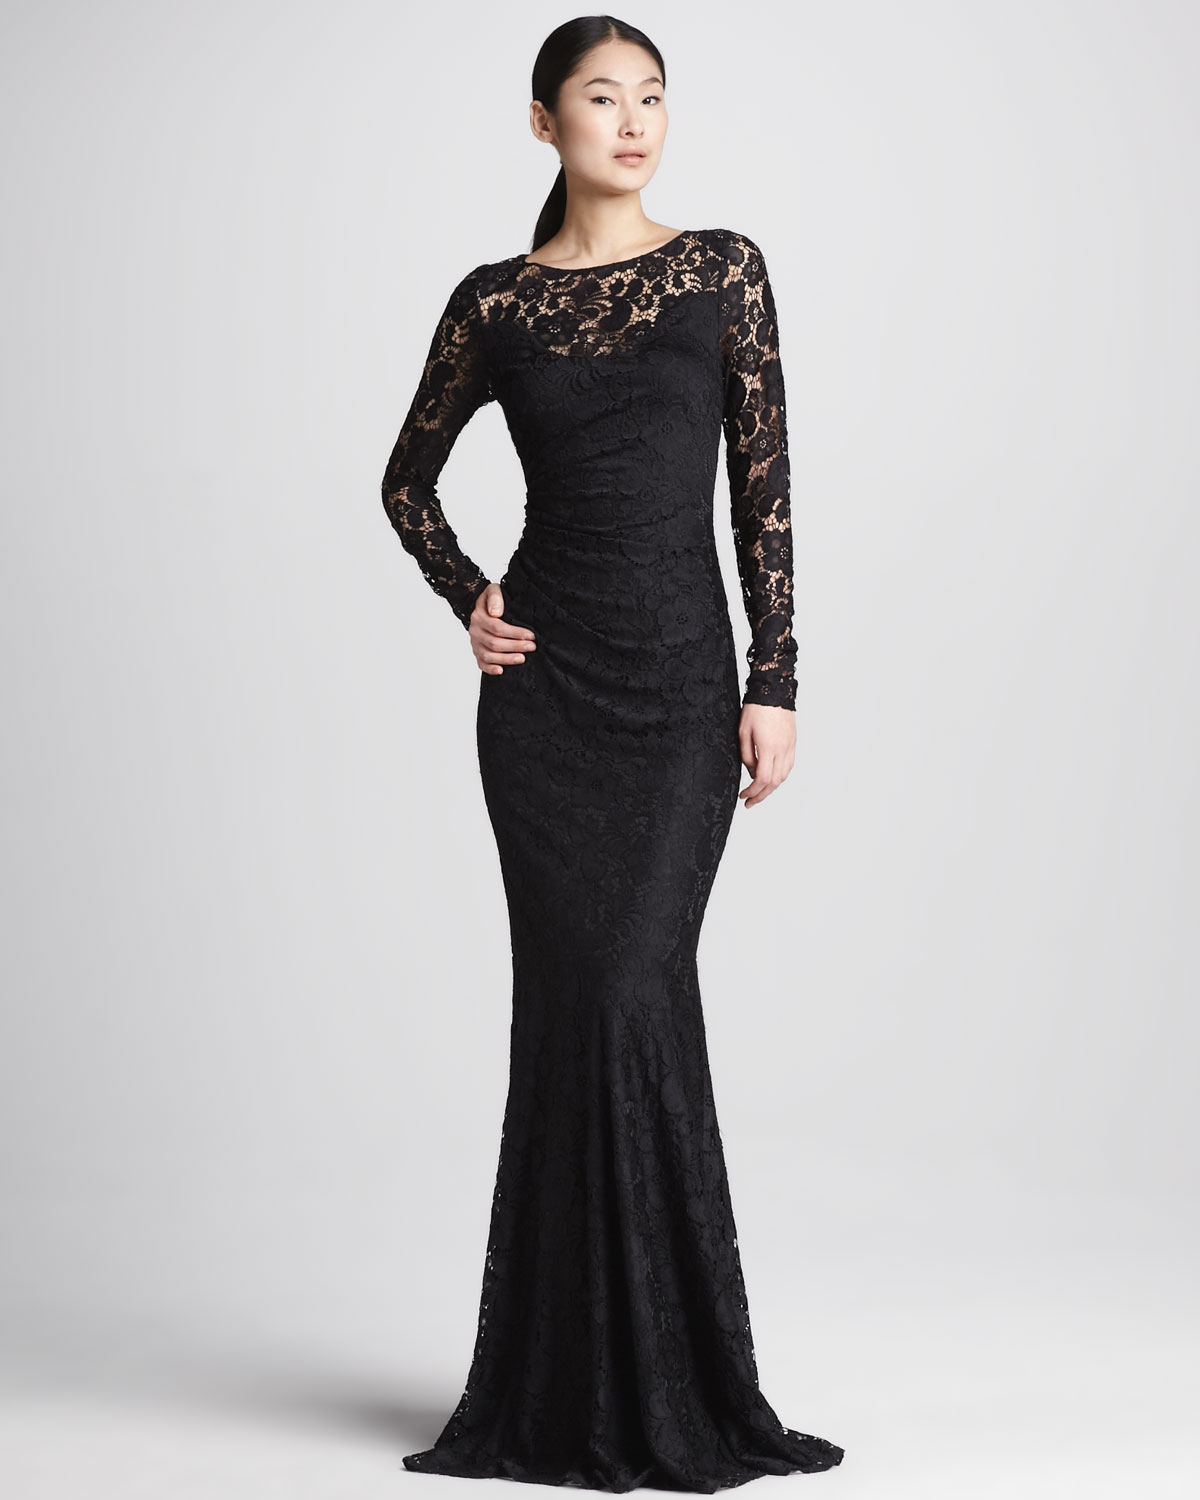 Lace-Embroidered Long Illusion Prom Dress - PromGirl